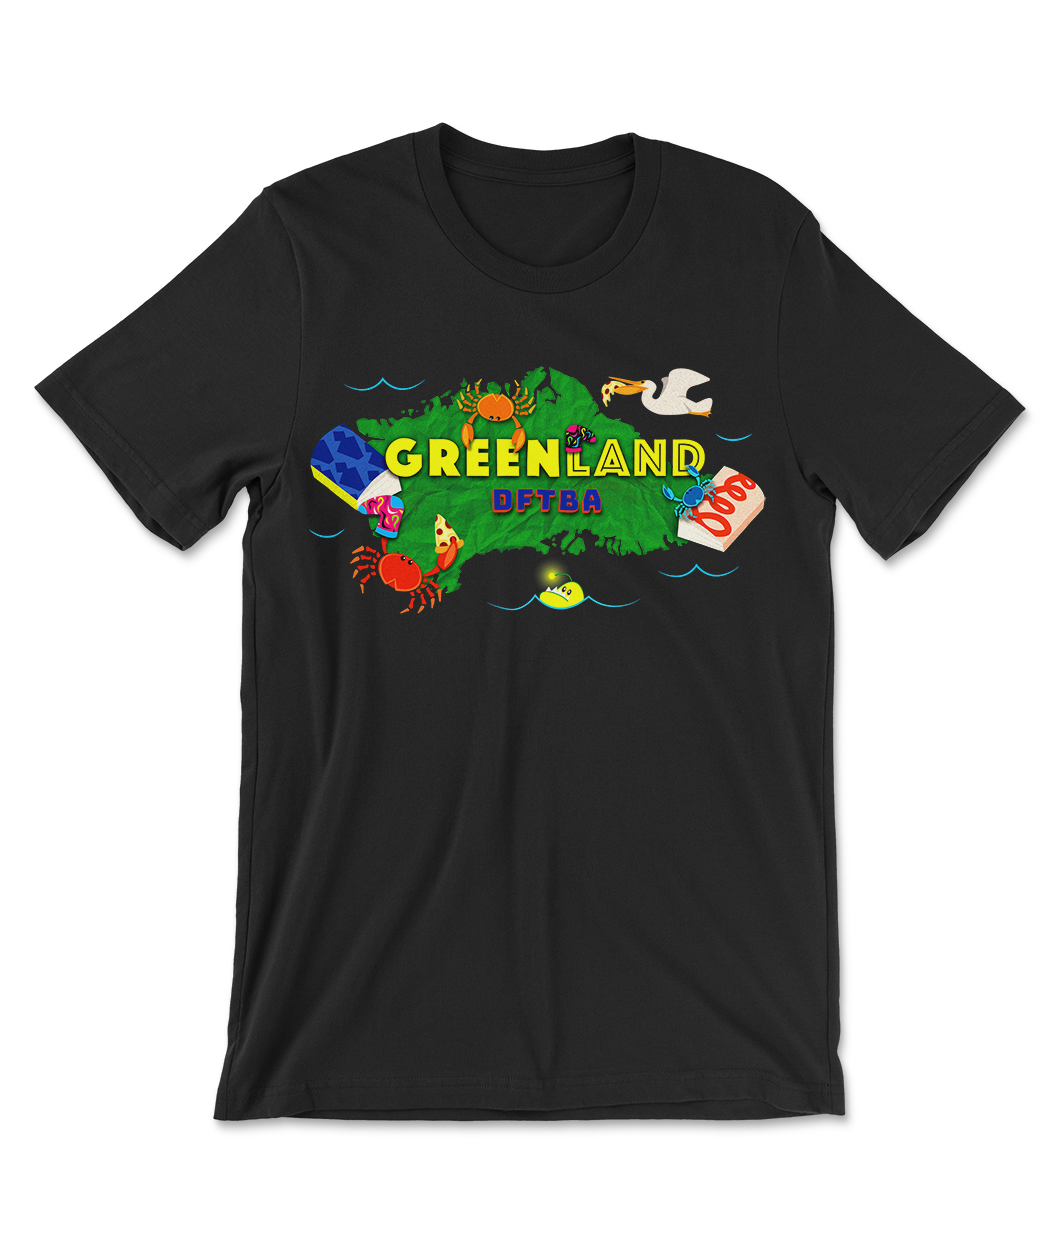 Black t-shirt with a green illustrated map of Greenland with the words 'Greenland DFTBA